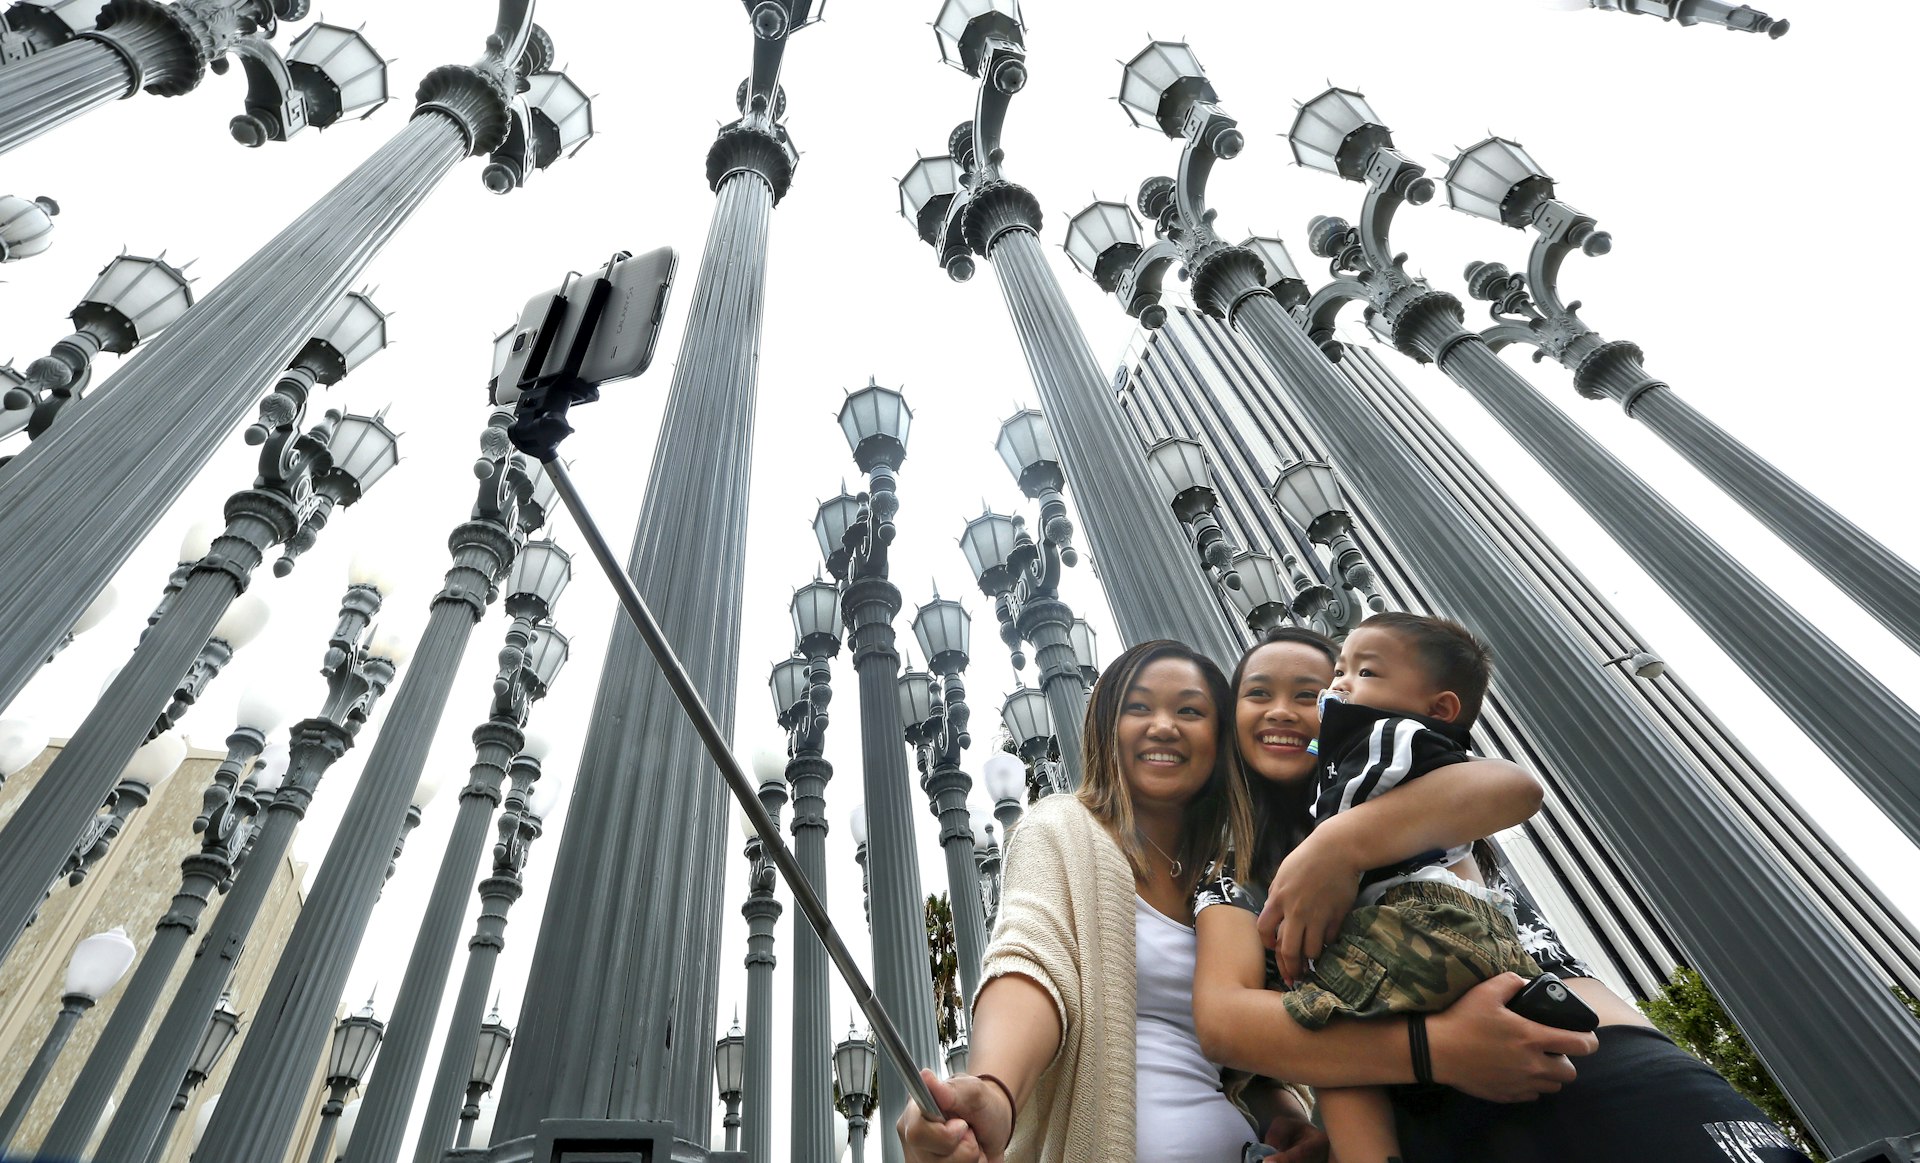 Three people taking a selfie in front of the Urban Light installation at the Los Angeles County Museum of Art